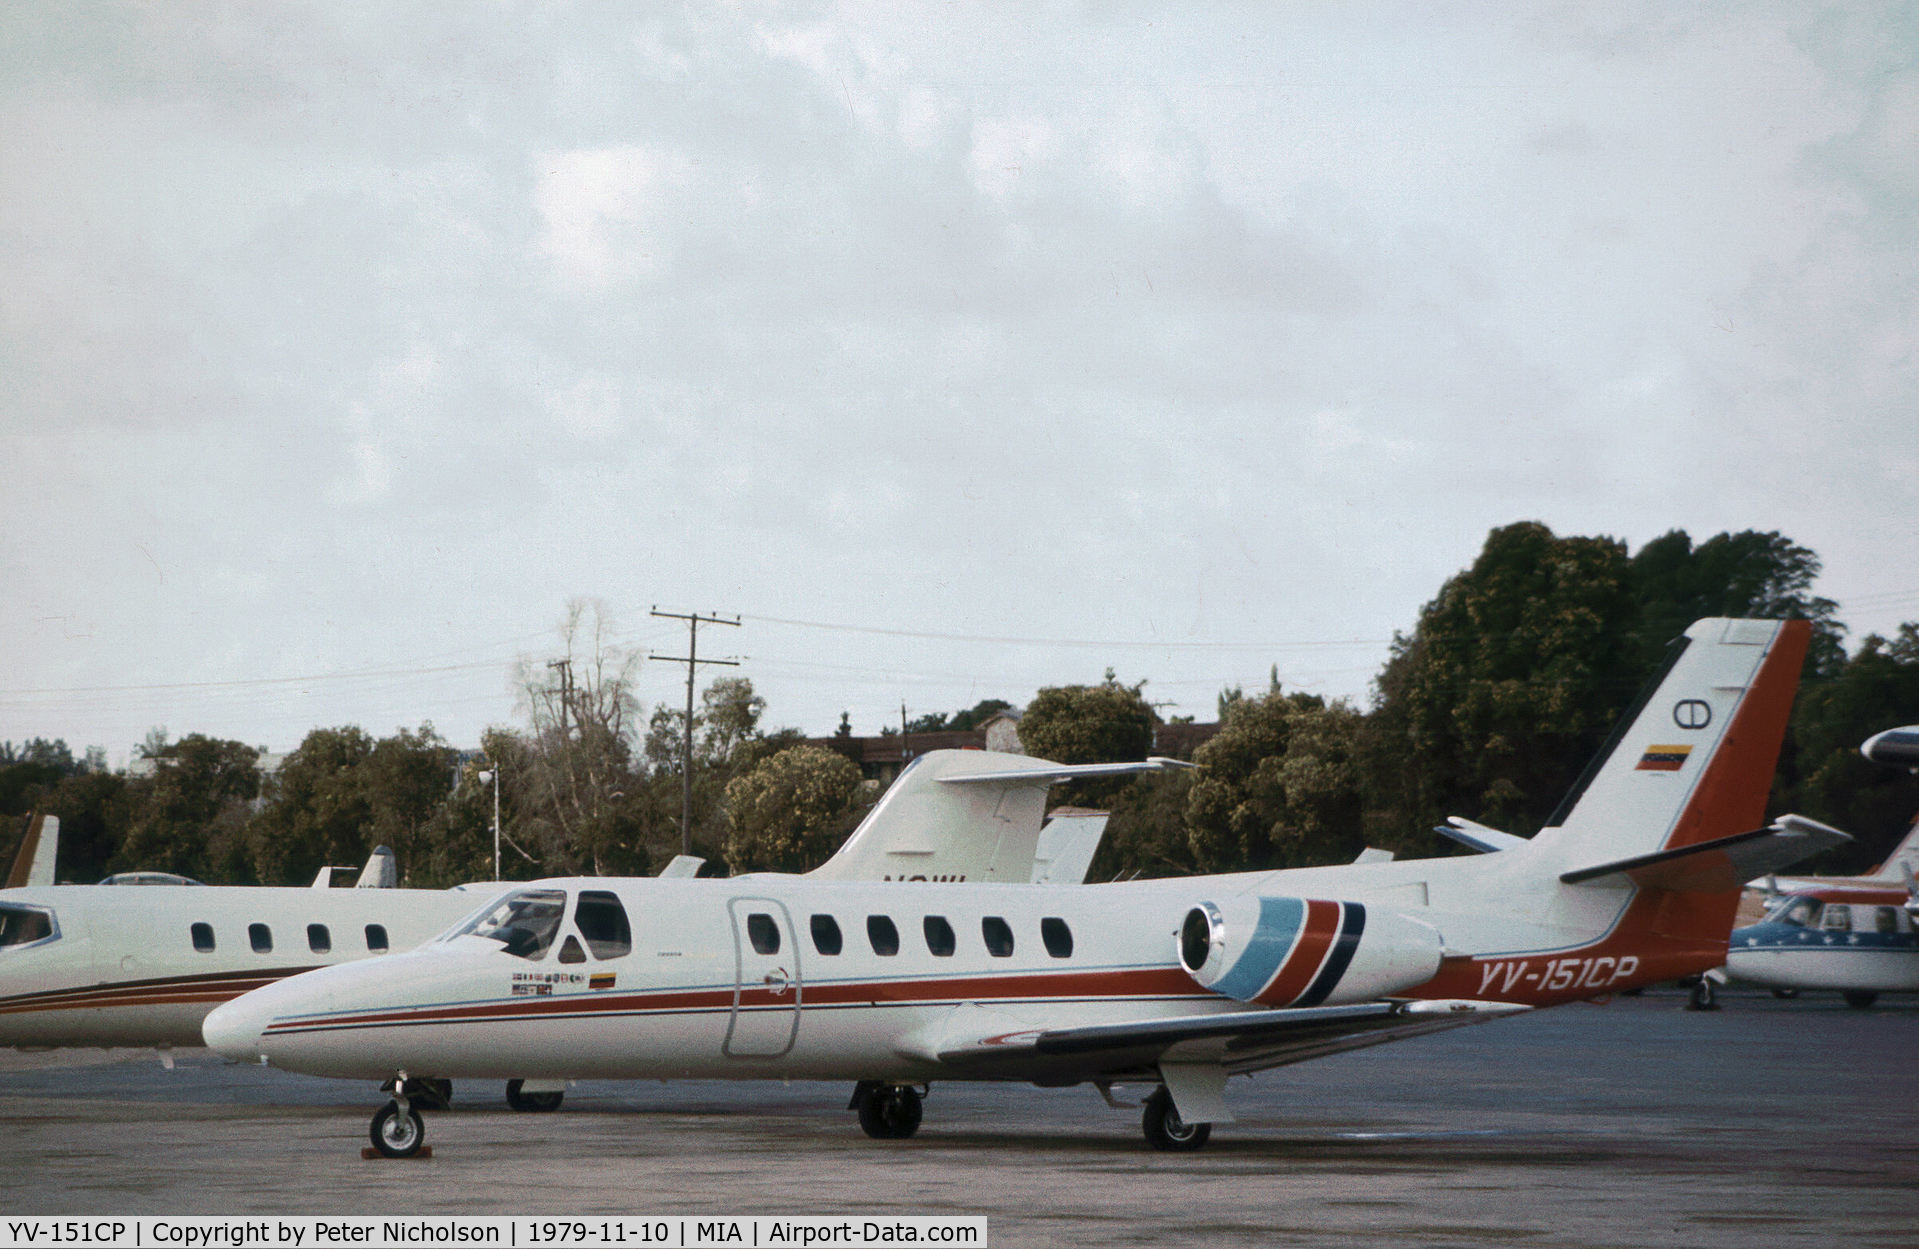 YV-151CP, 1978 Cessna 551 Citation II C/N 551-0005, Cessna Citation II as seen at Miami in November 1979.